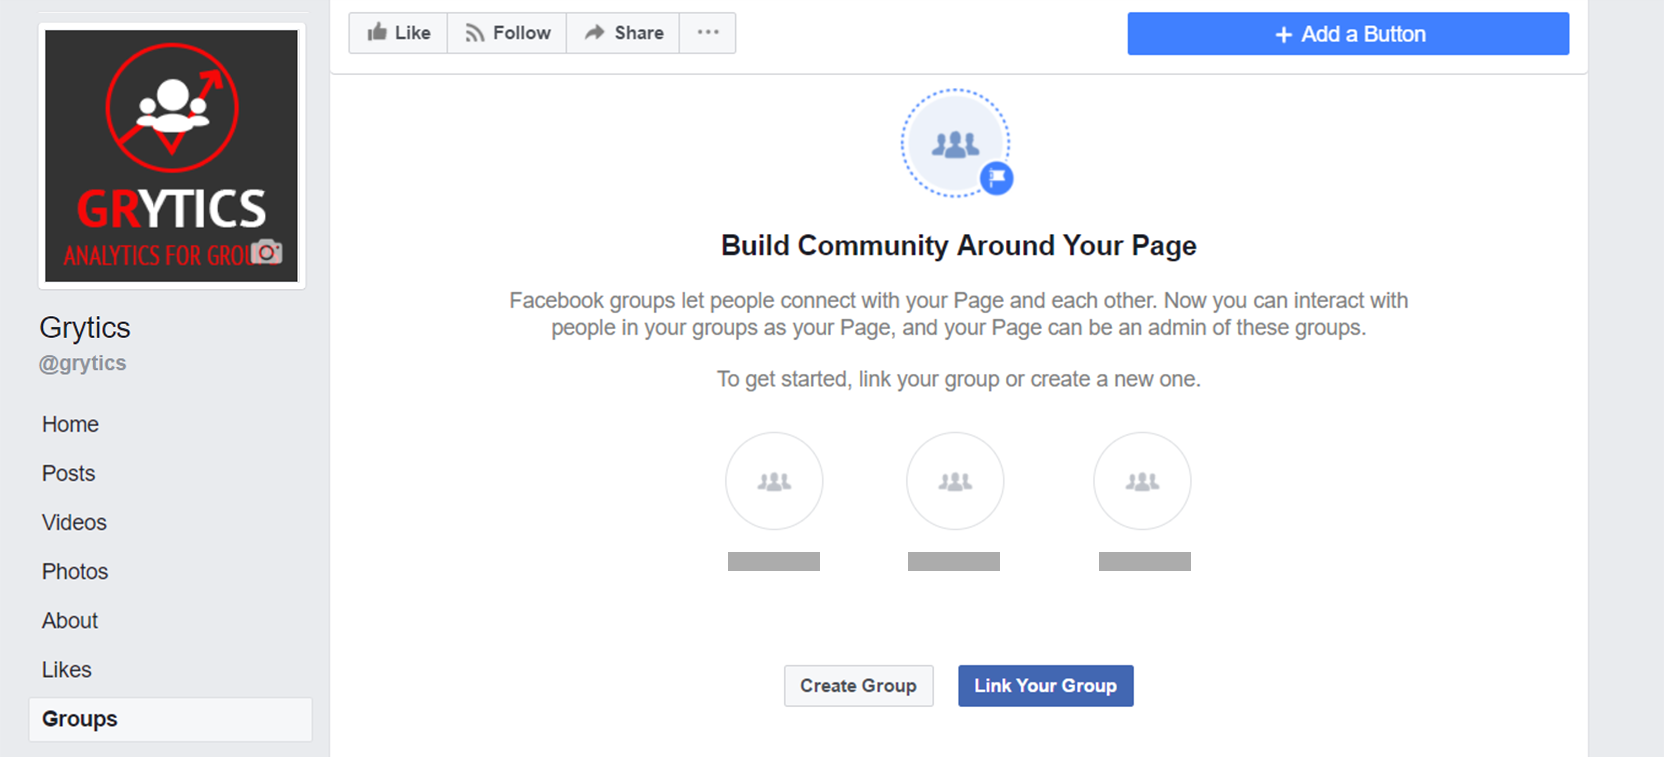 How To Link Your Facebook Groups And Pages Grytics For Communities